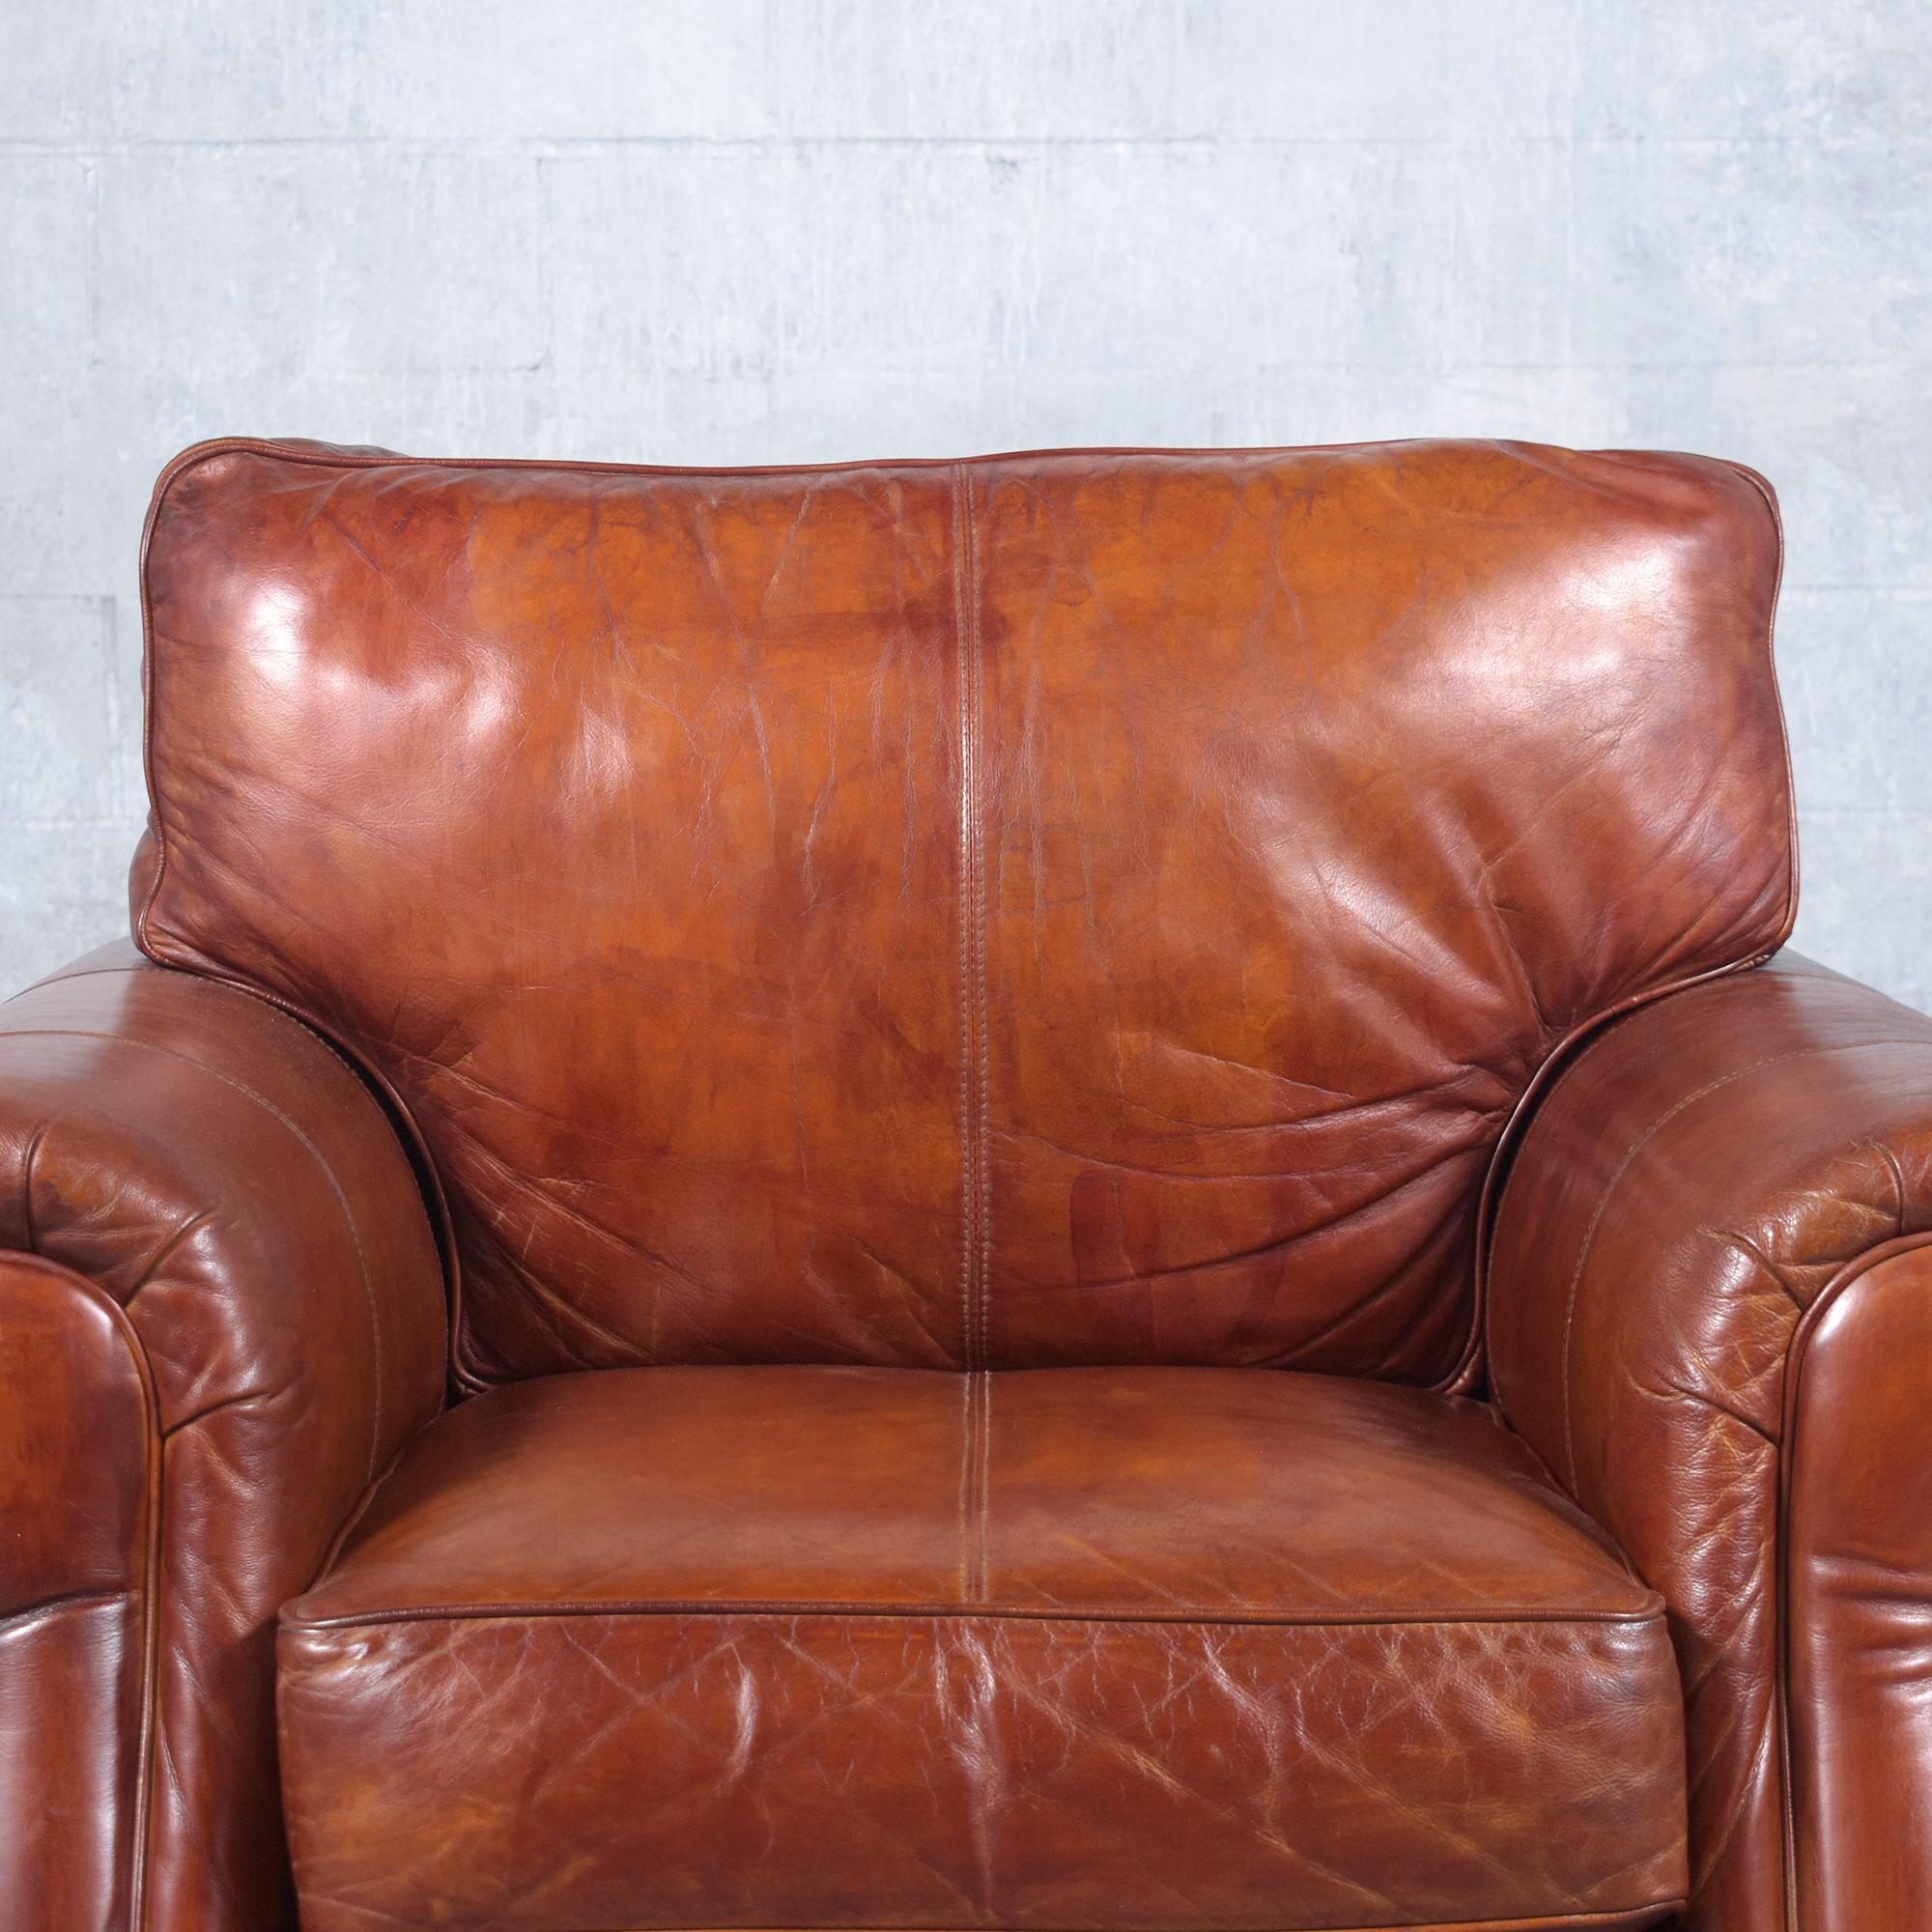 Restored Vintage Leather Armchairs in Cognac Brown with Carved Bun Legs In Good Condition For Sale In Los Angeles, CA